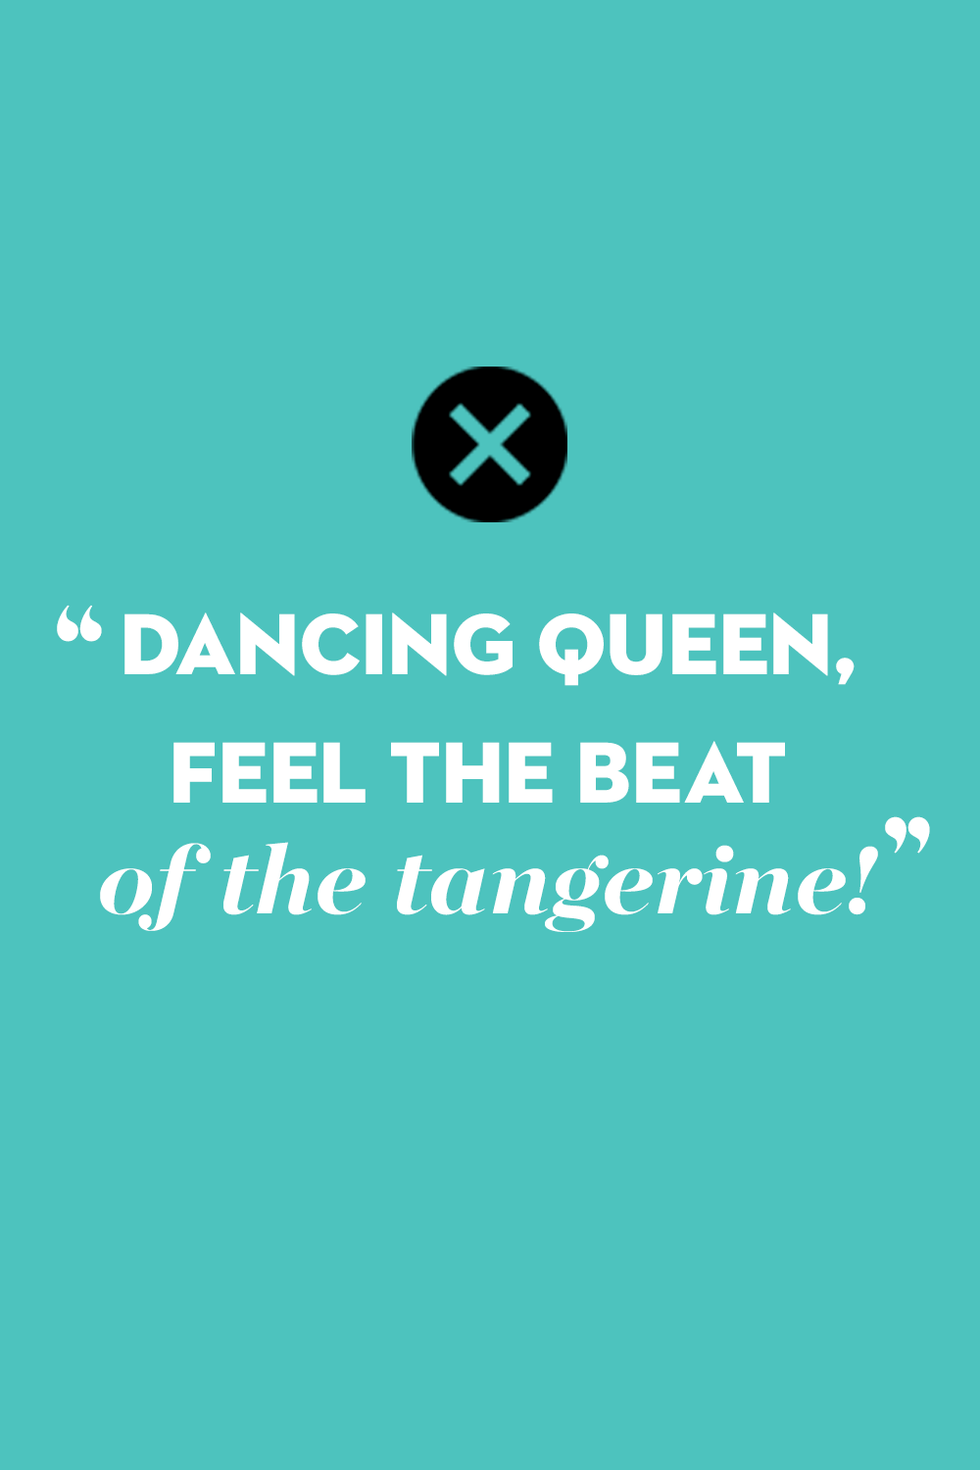 Best Queen Lyrics: 15 Epic Lines to Live By